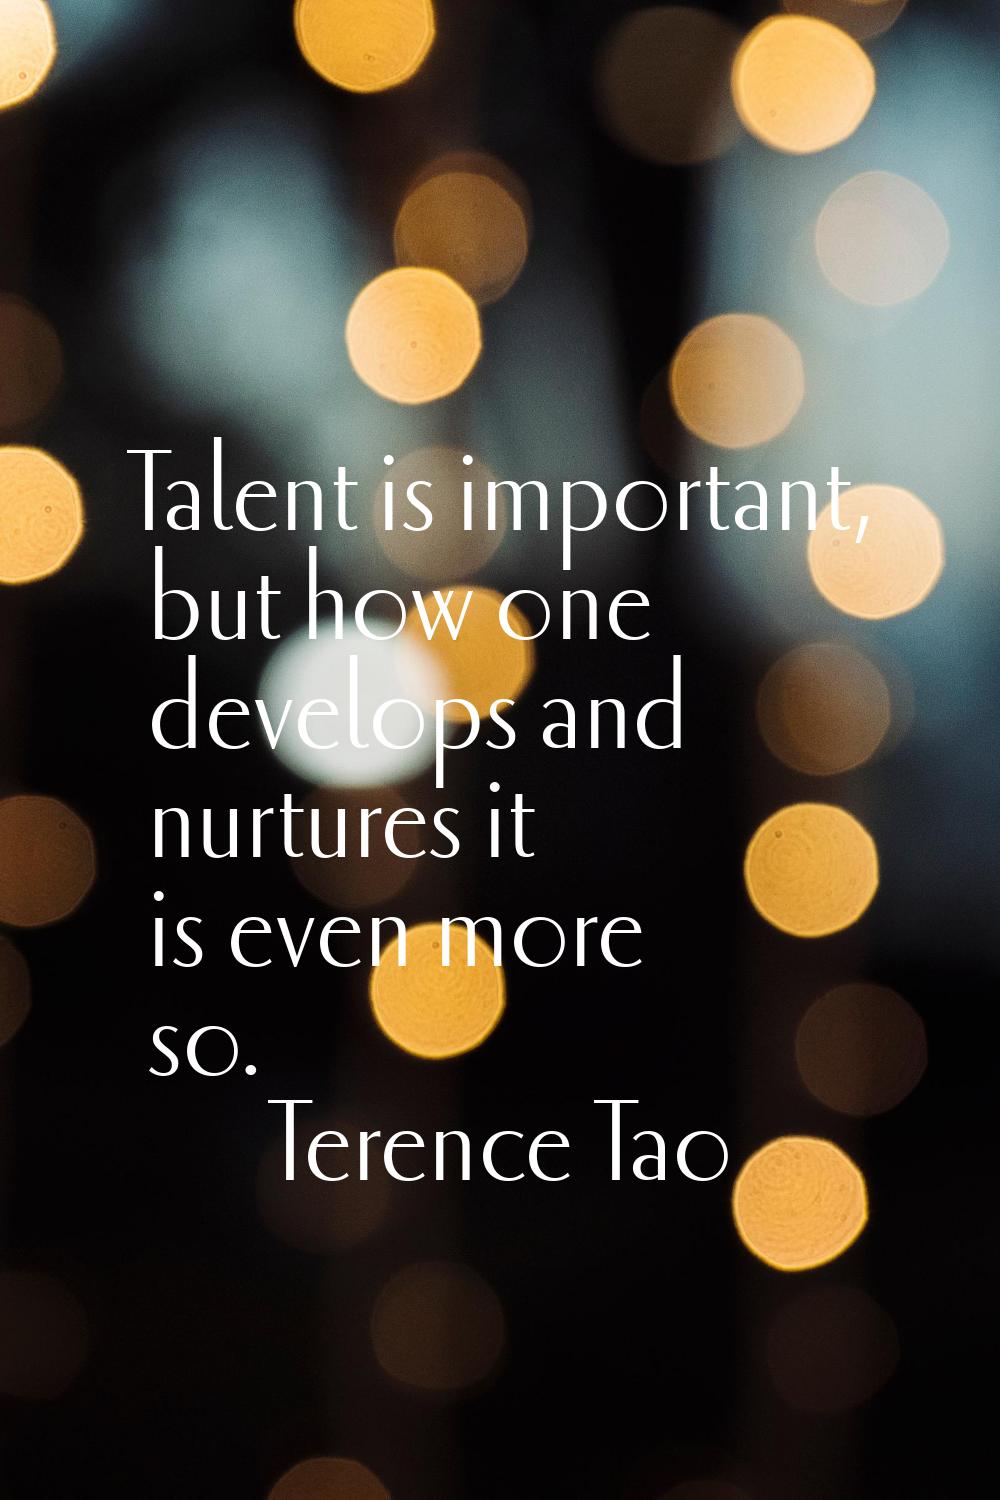 Talent is important, but how one develops and nurtures it is even more so.